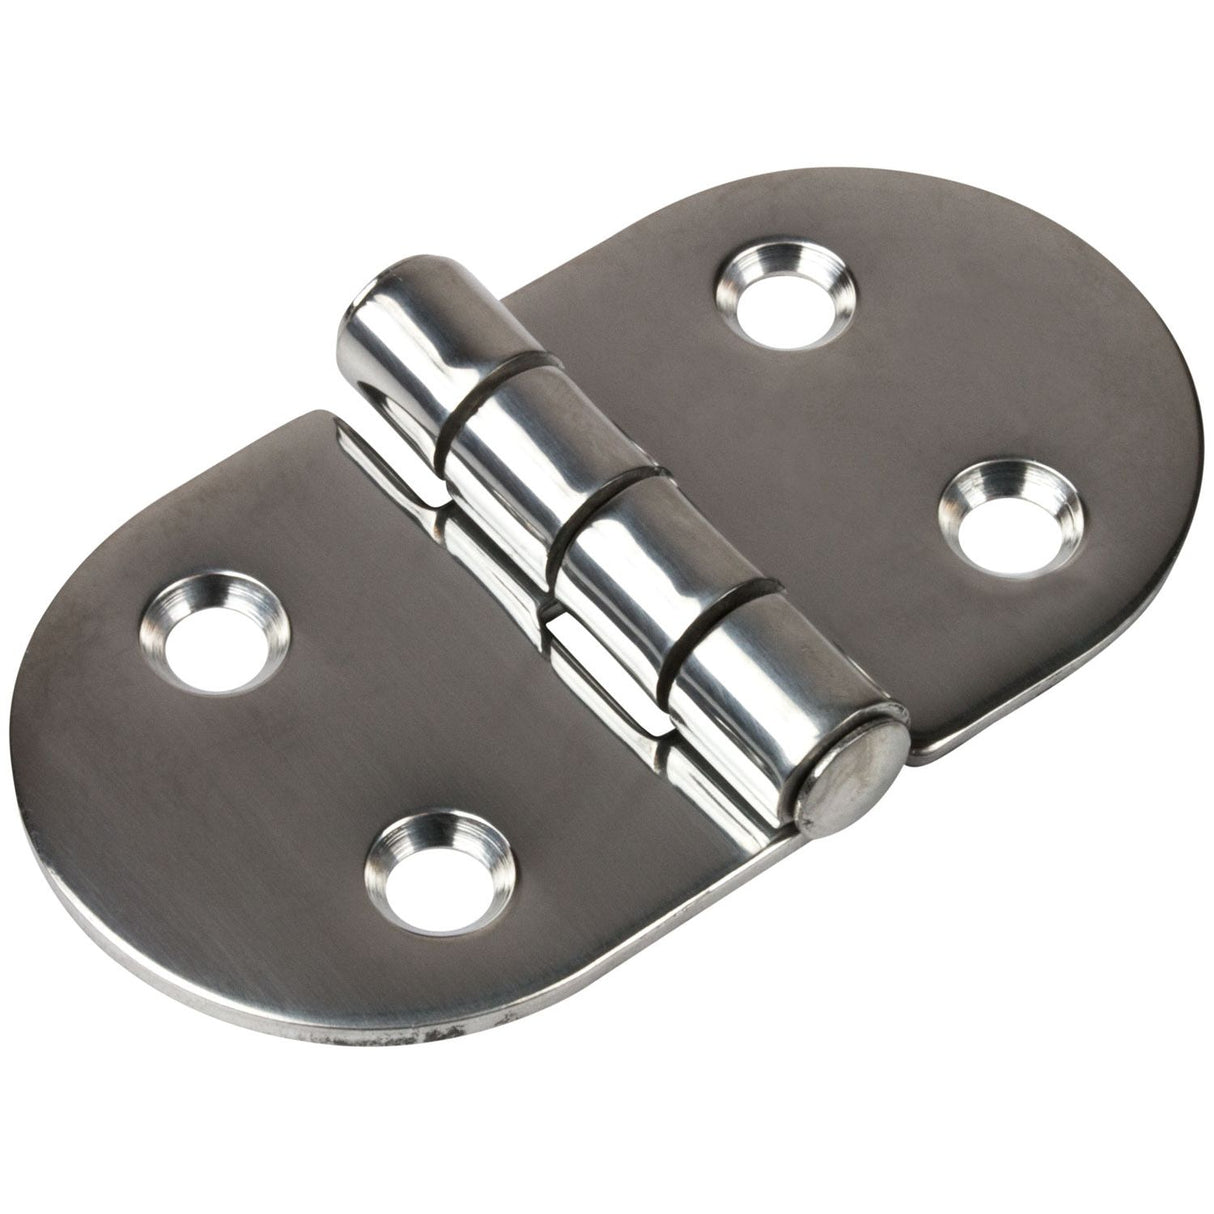 2-3/4" Round Side Stainless Steel Hinge